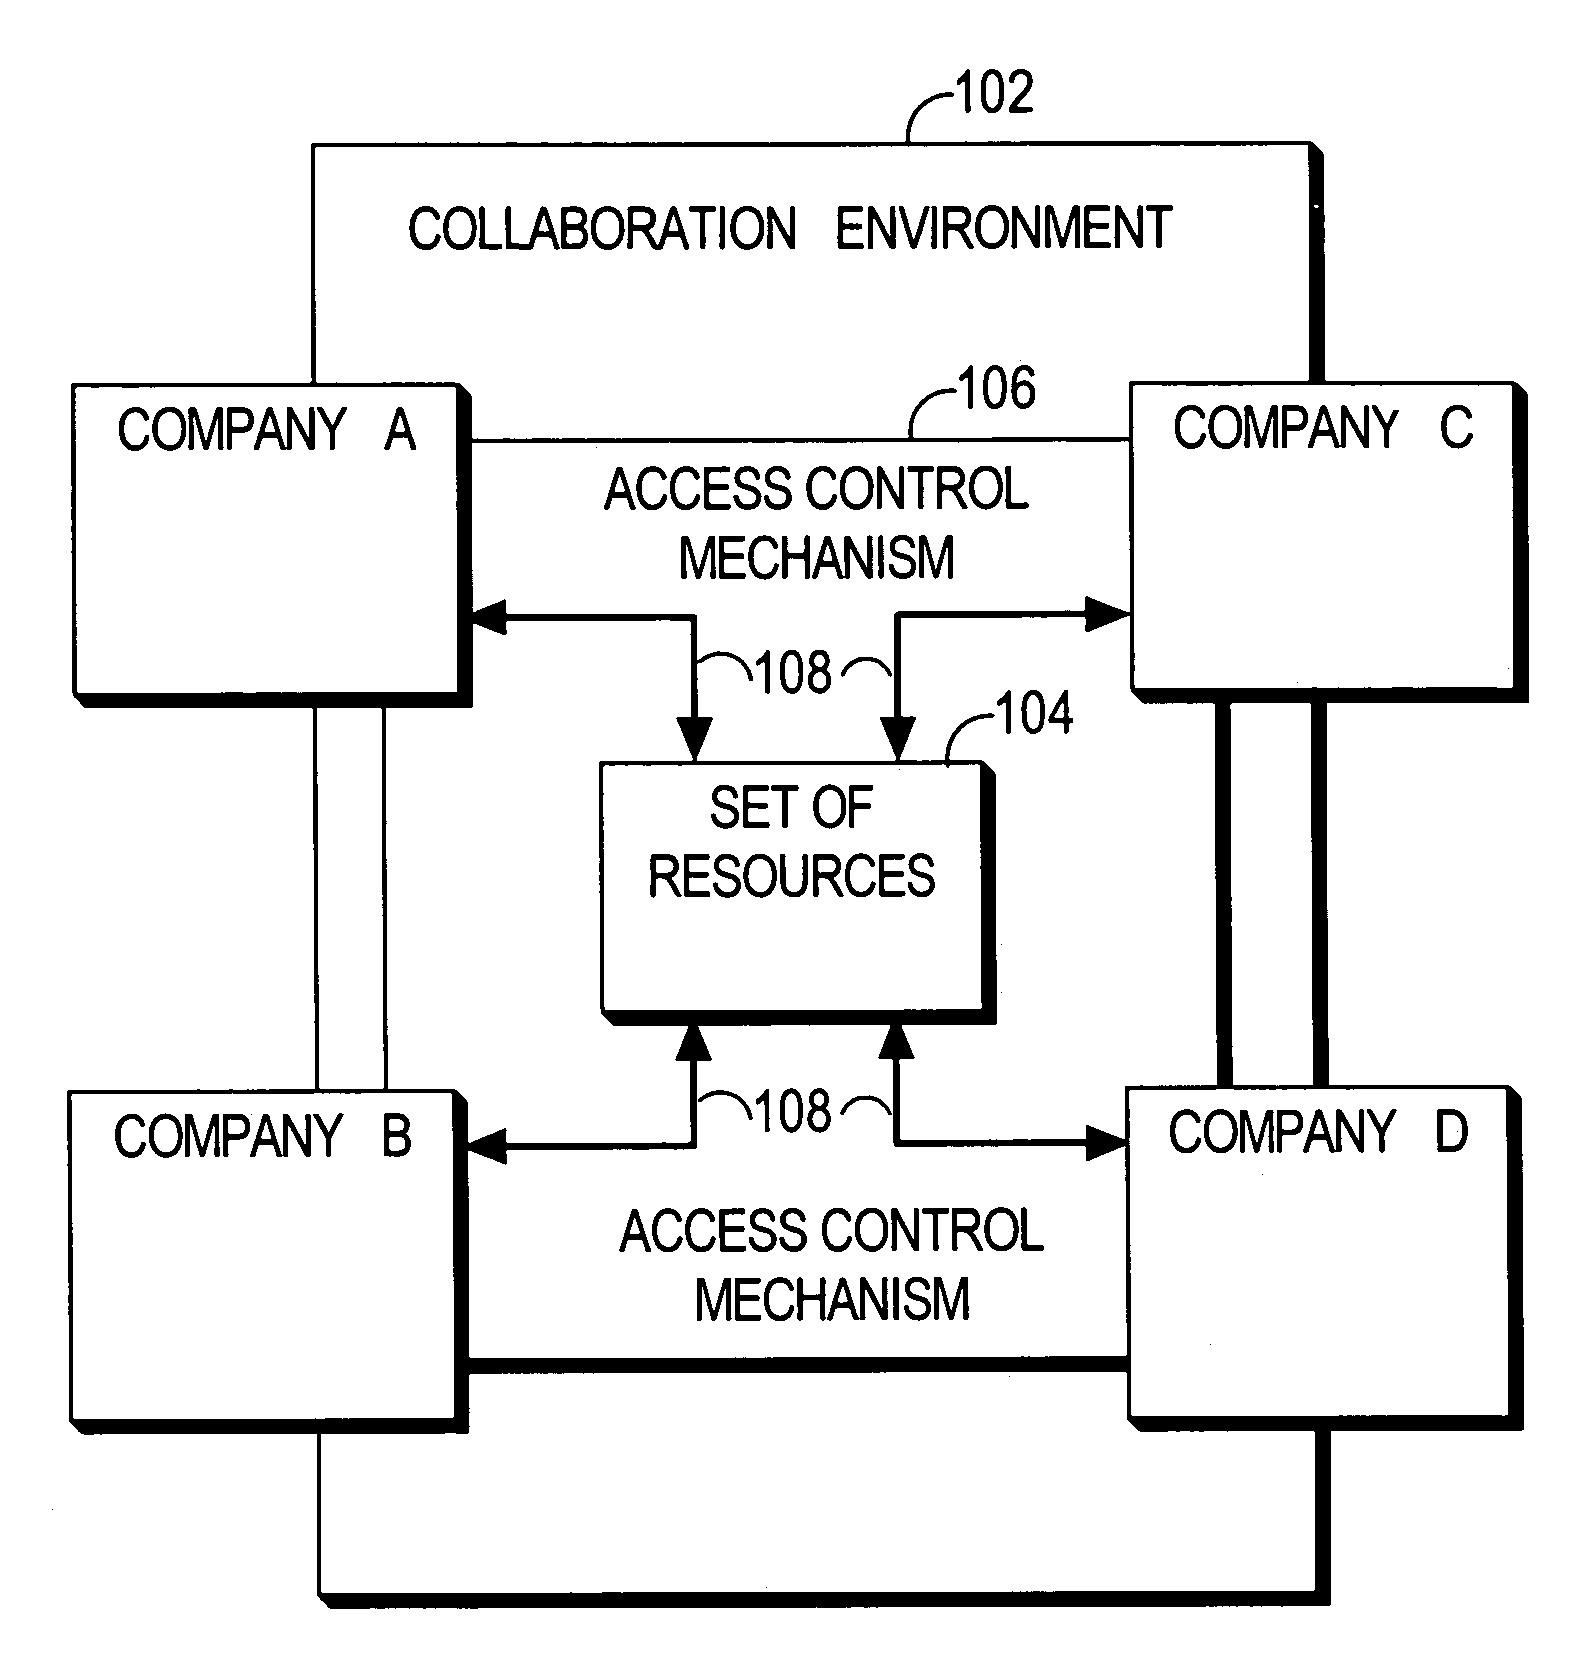 Isolated working chamber associated with a secure inter-company collaboration environment